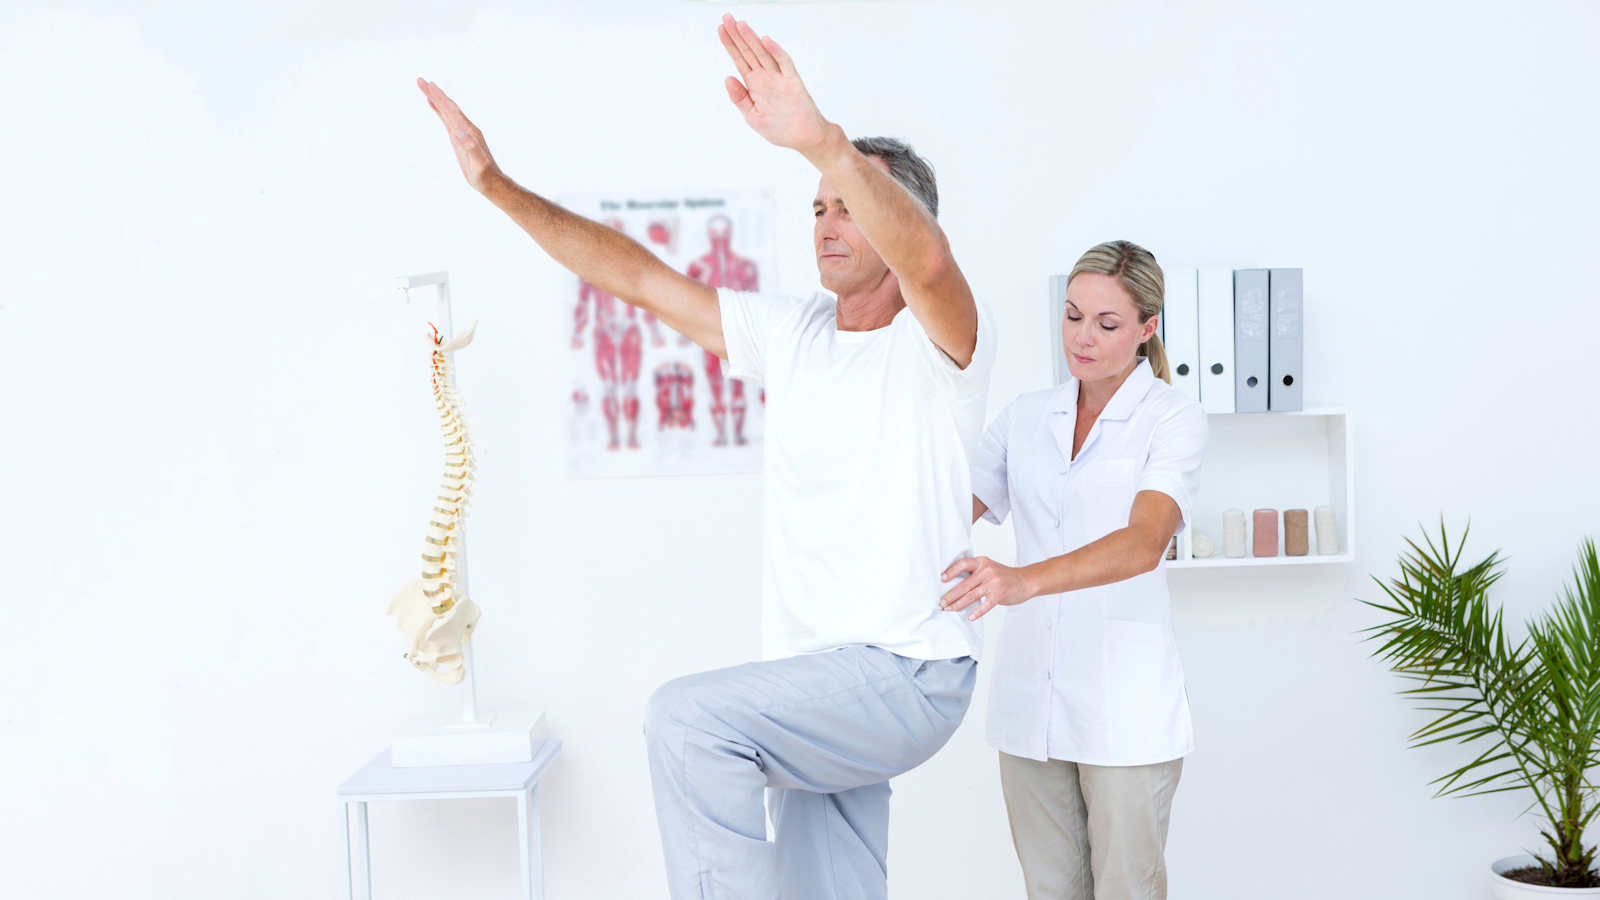 Whole Health Chiropractic Center of Issaquah